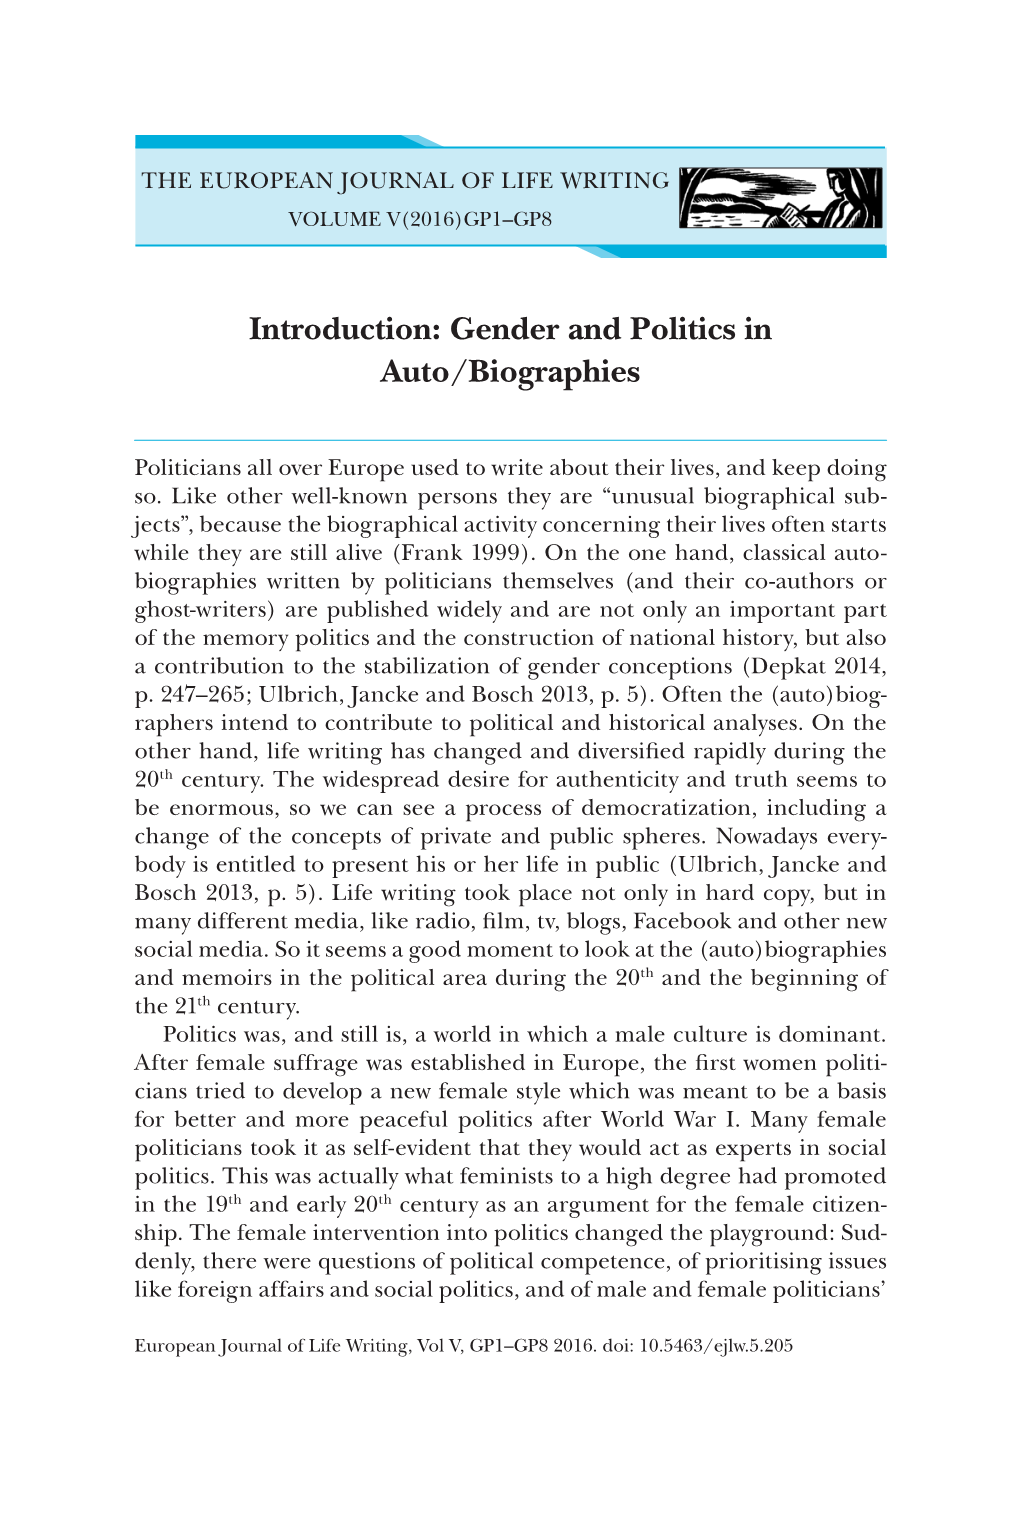 Introduction: Gender and Politics in Auto/Biographies